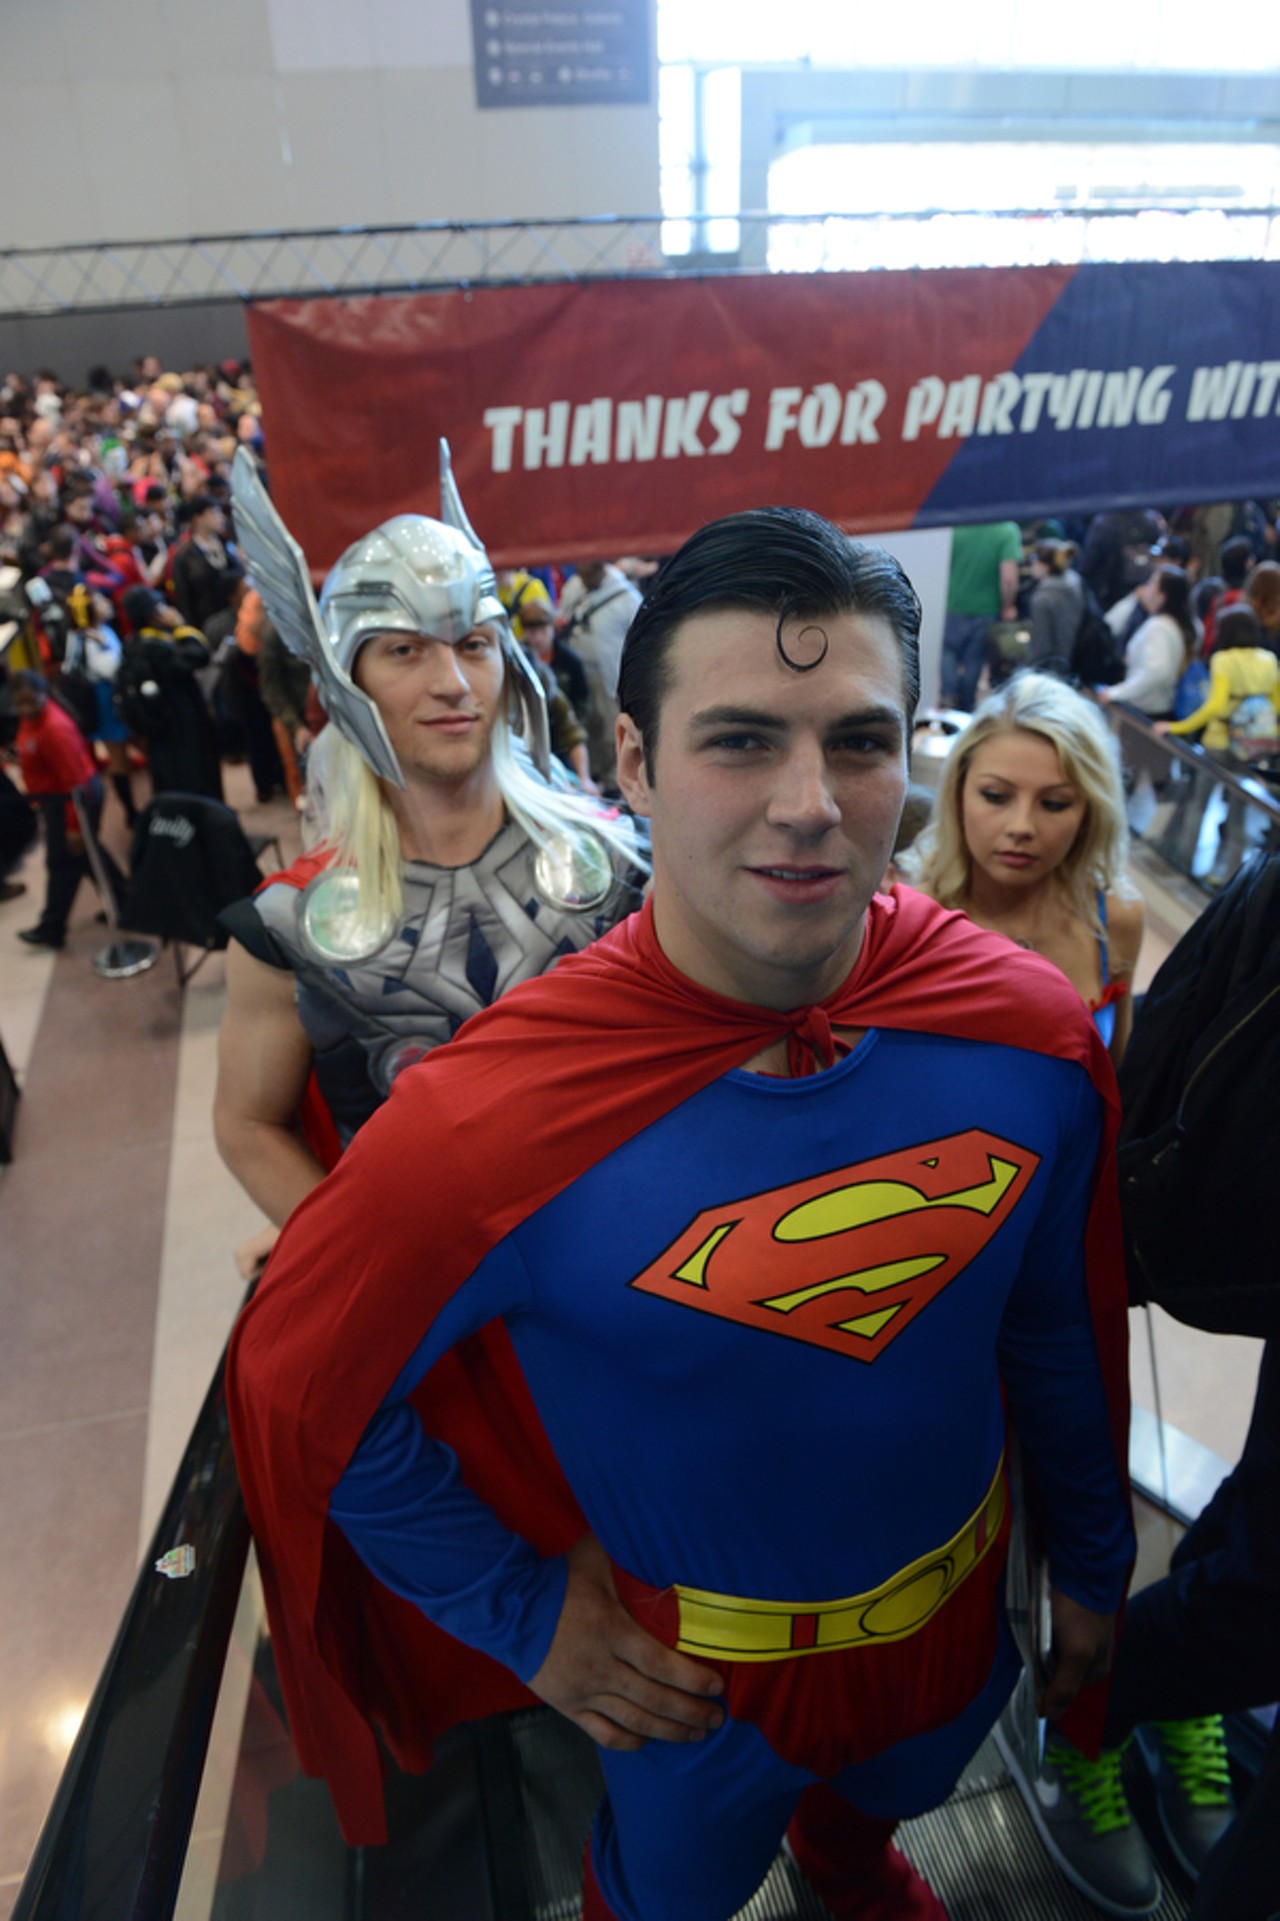 The Best of Superman Cosplay